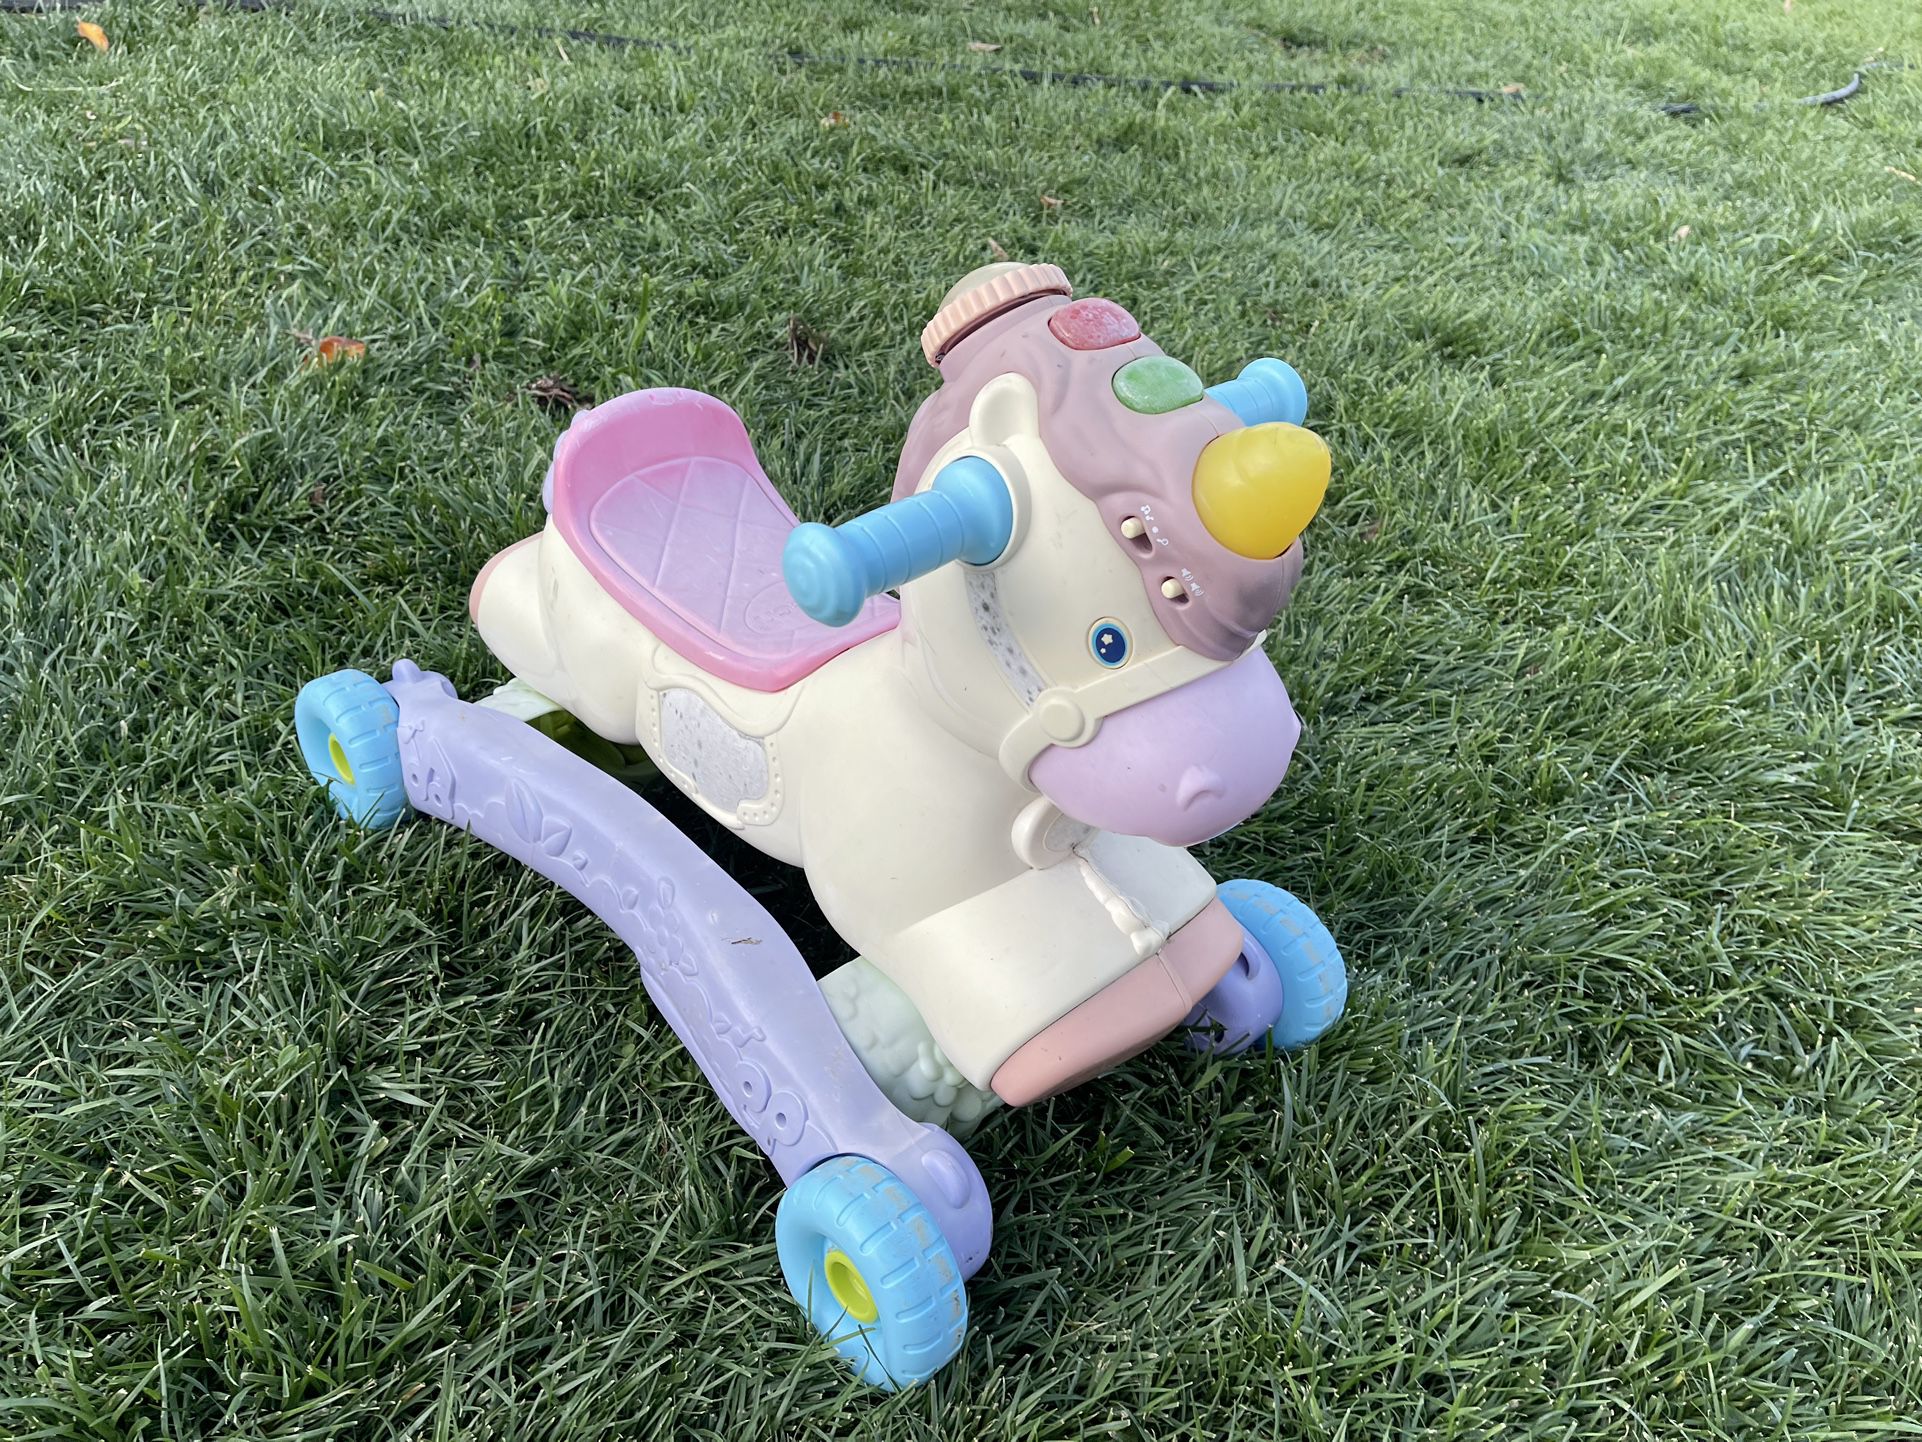 Horse Toy Wheel Ride For Kids 